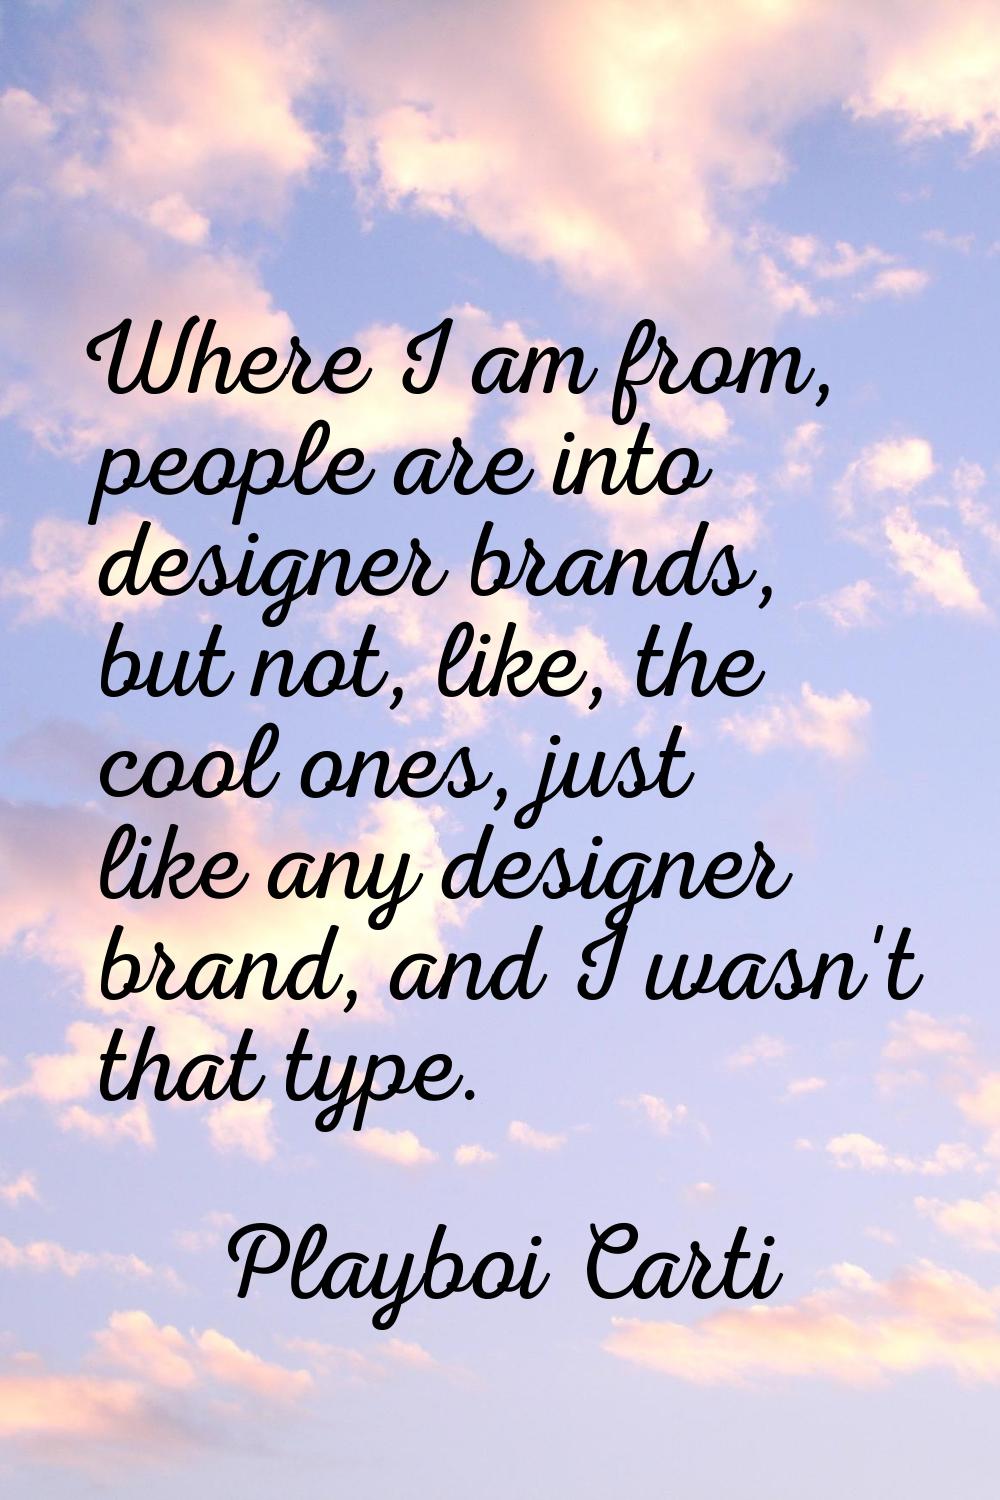 Where I am from, people are into designer brands, but not, like, the cool ones, just like any desig